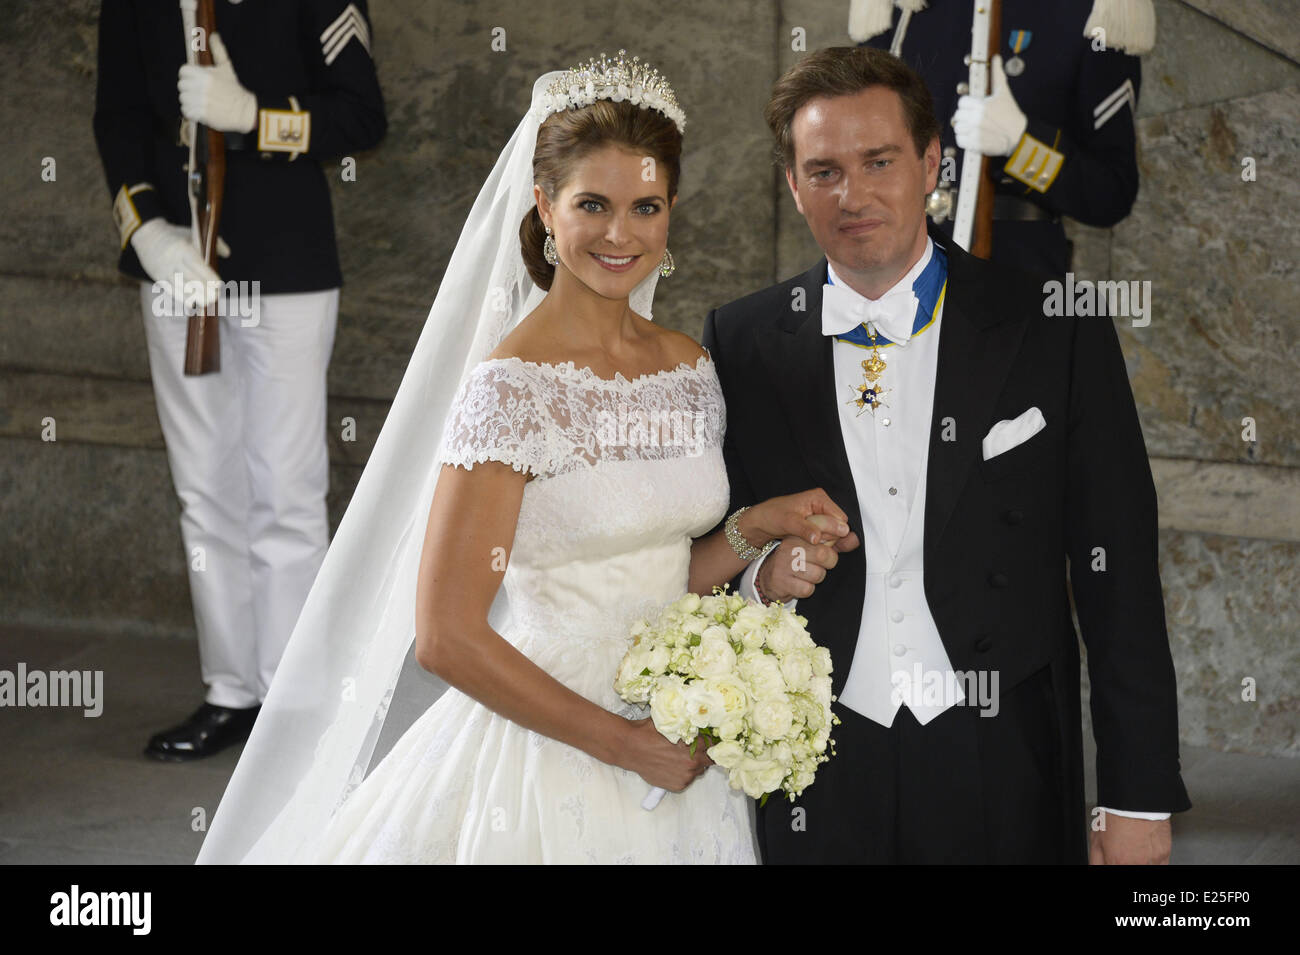 The wedding of Princess Madeleine of Sweden and Christopher O'Neill hosted by King Carl Gustaf XIV and Queen Silvia at The Royal Palace  Where: Stockholm, Sweden When: 08 Jun 2013 Stock Photo